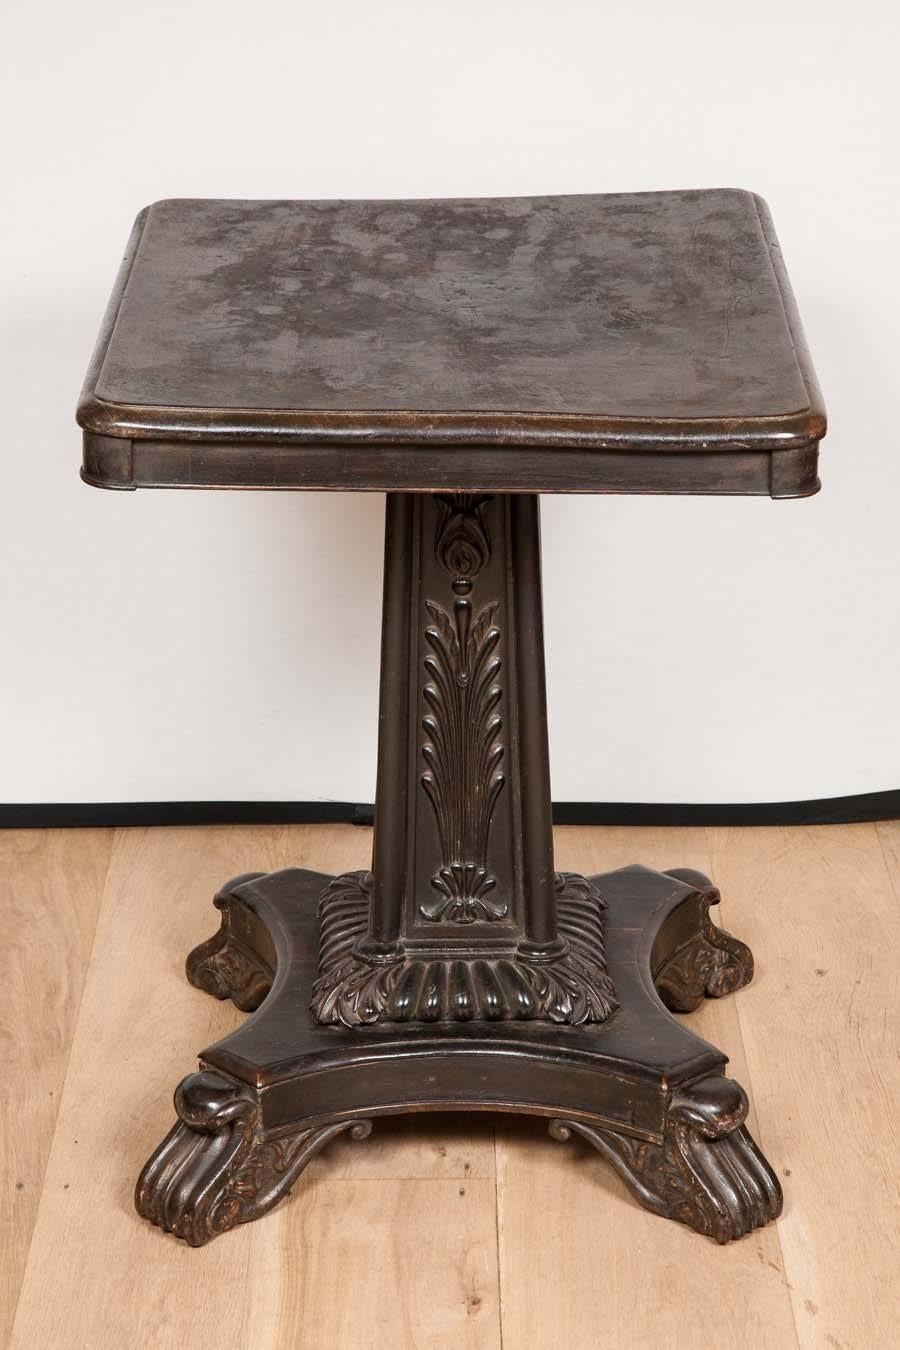 Indian 19th Cenutry Colonial Table, Probably from Calcutta Attributed to Lazarus